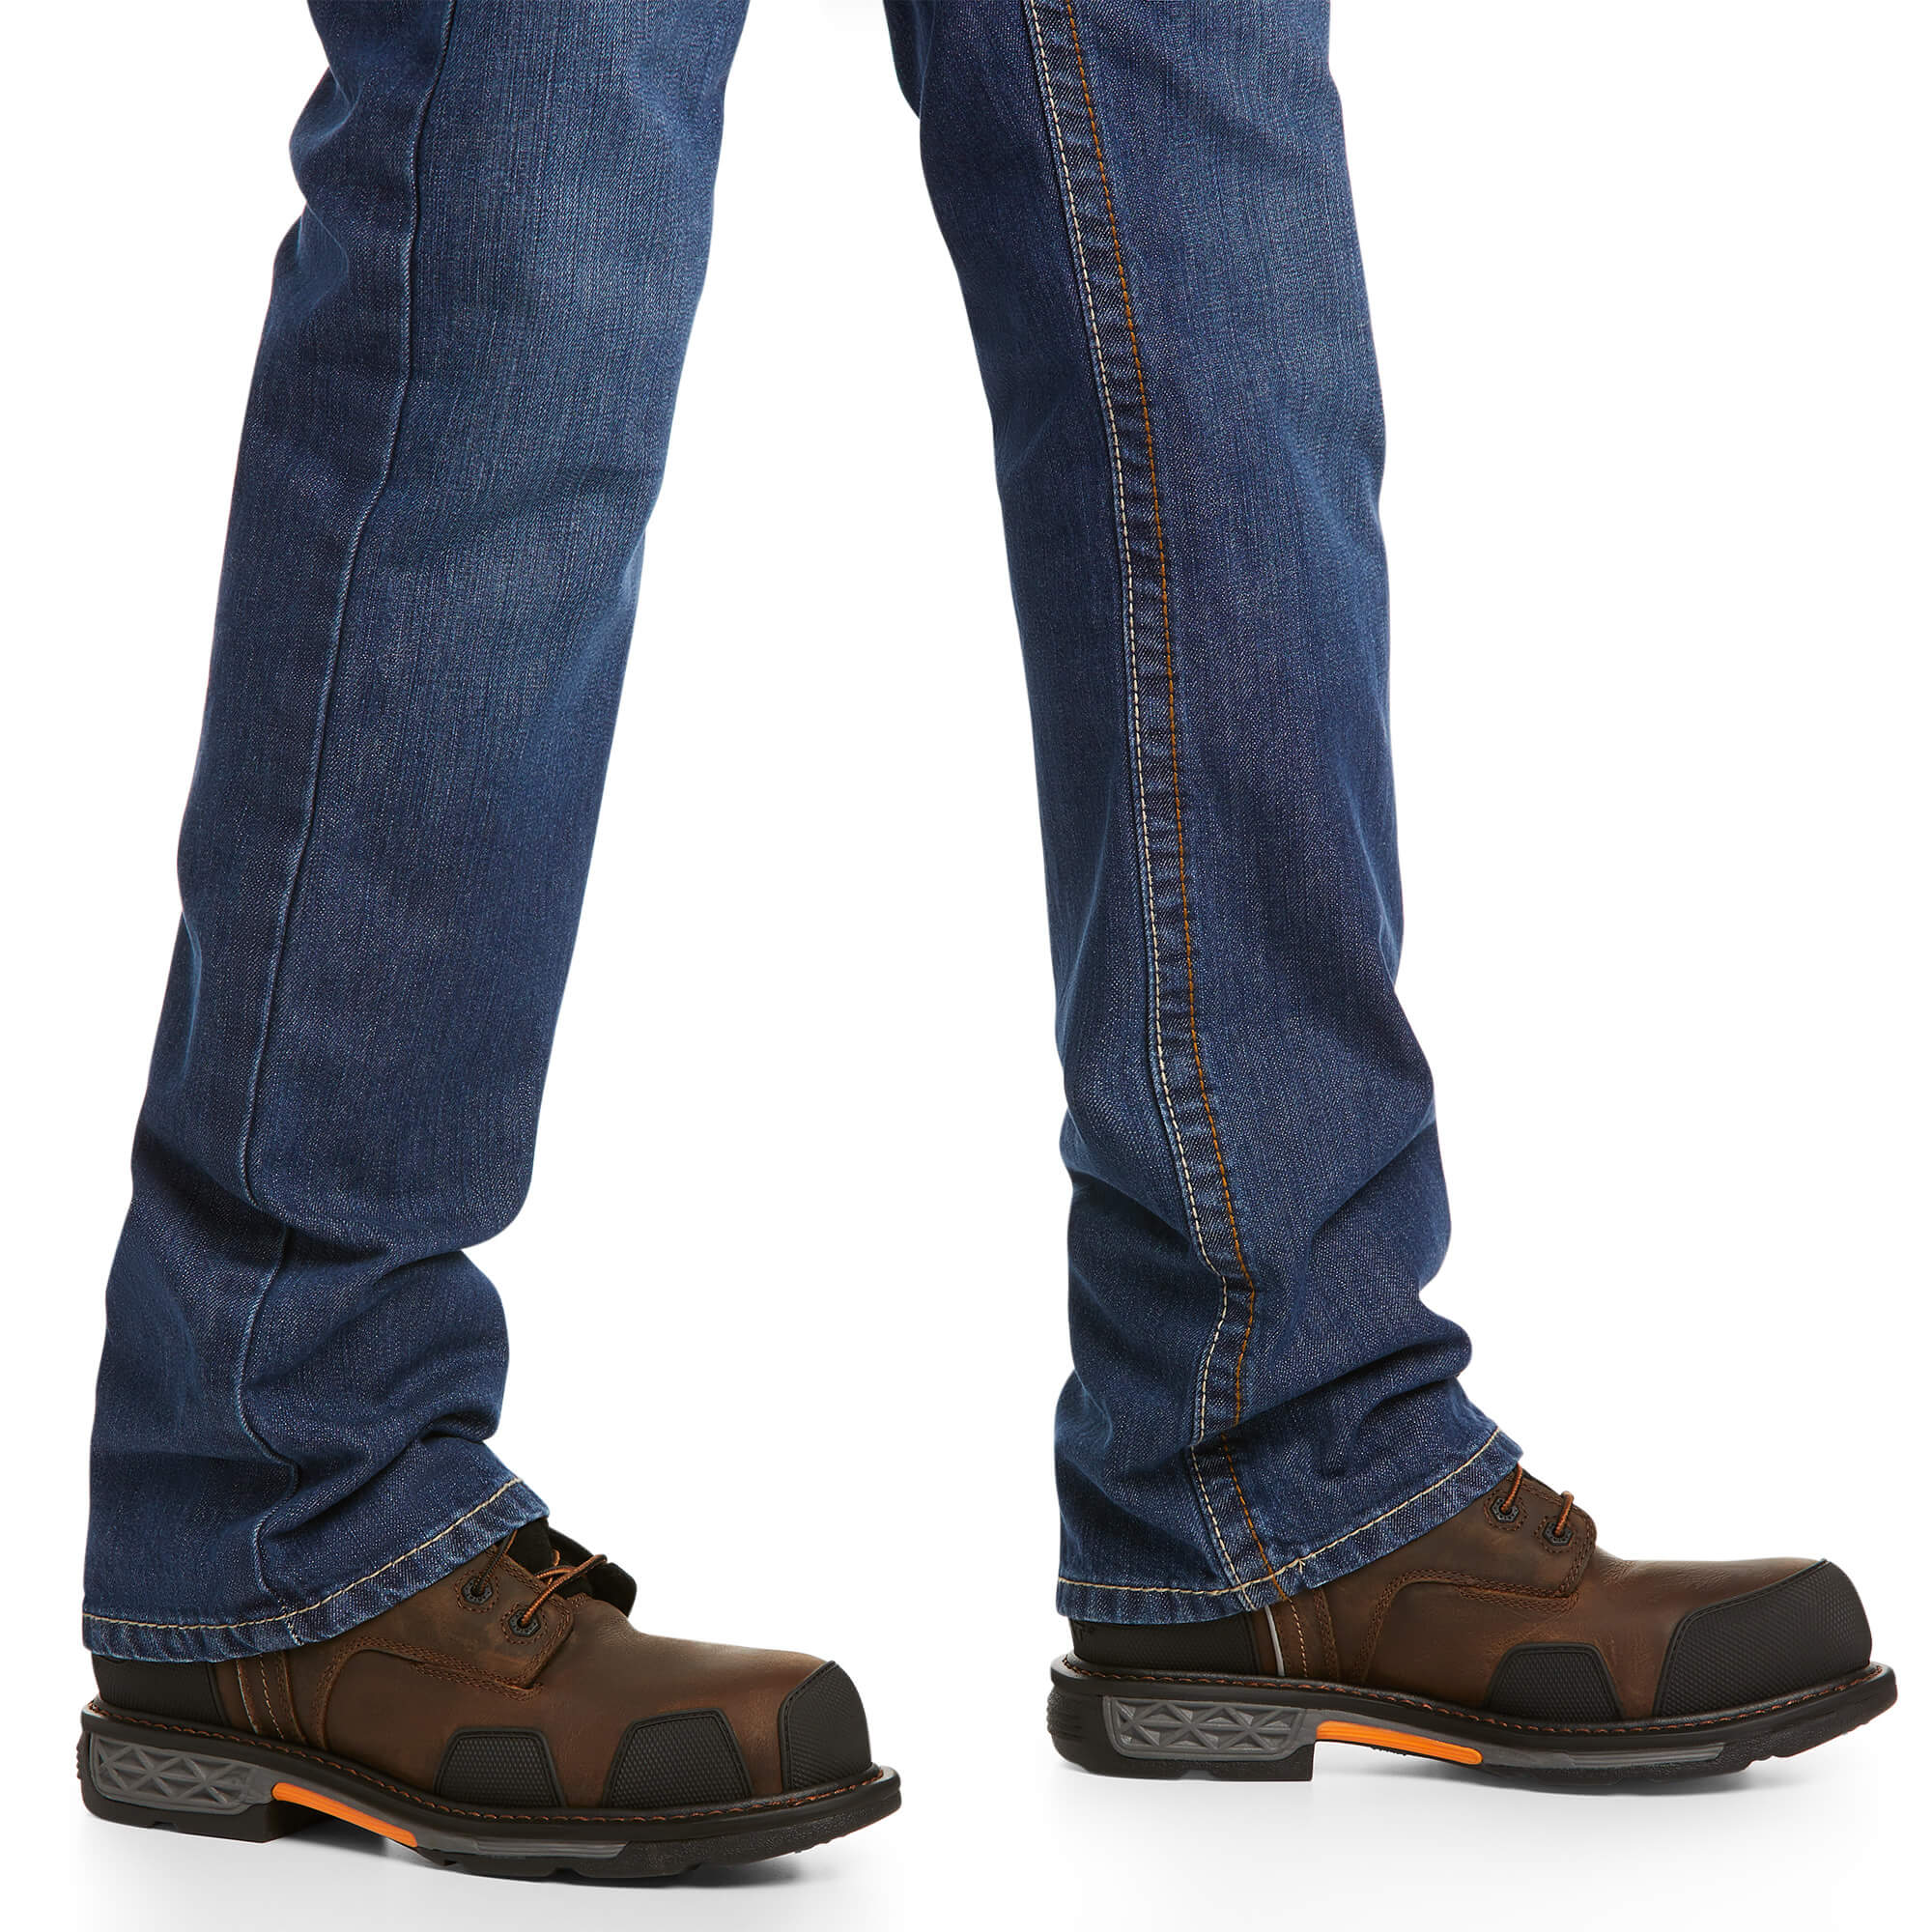 Ariat Flame Resistant M4 Relaxed Boot Cut Jeans from GME Supply